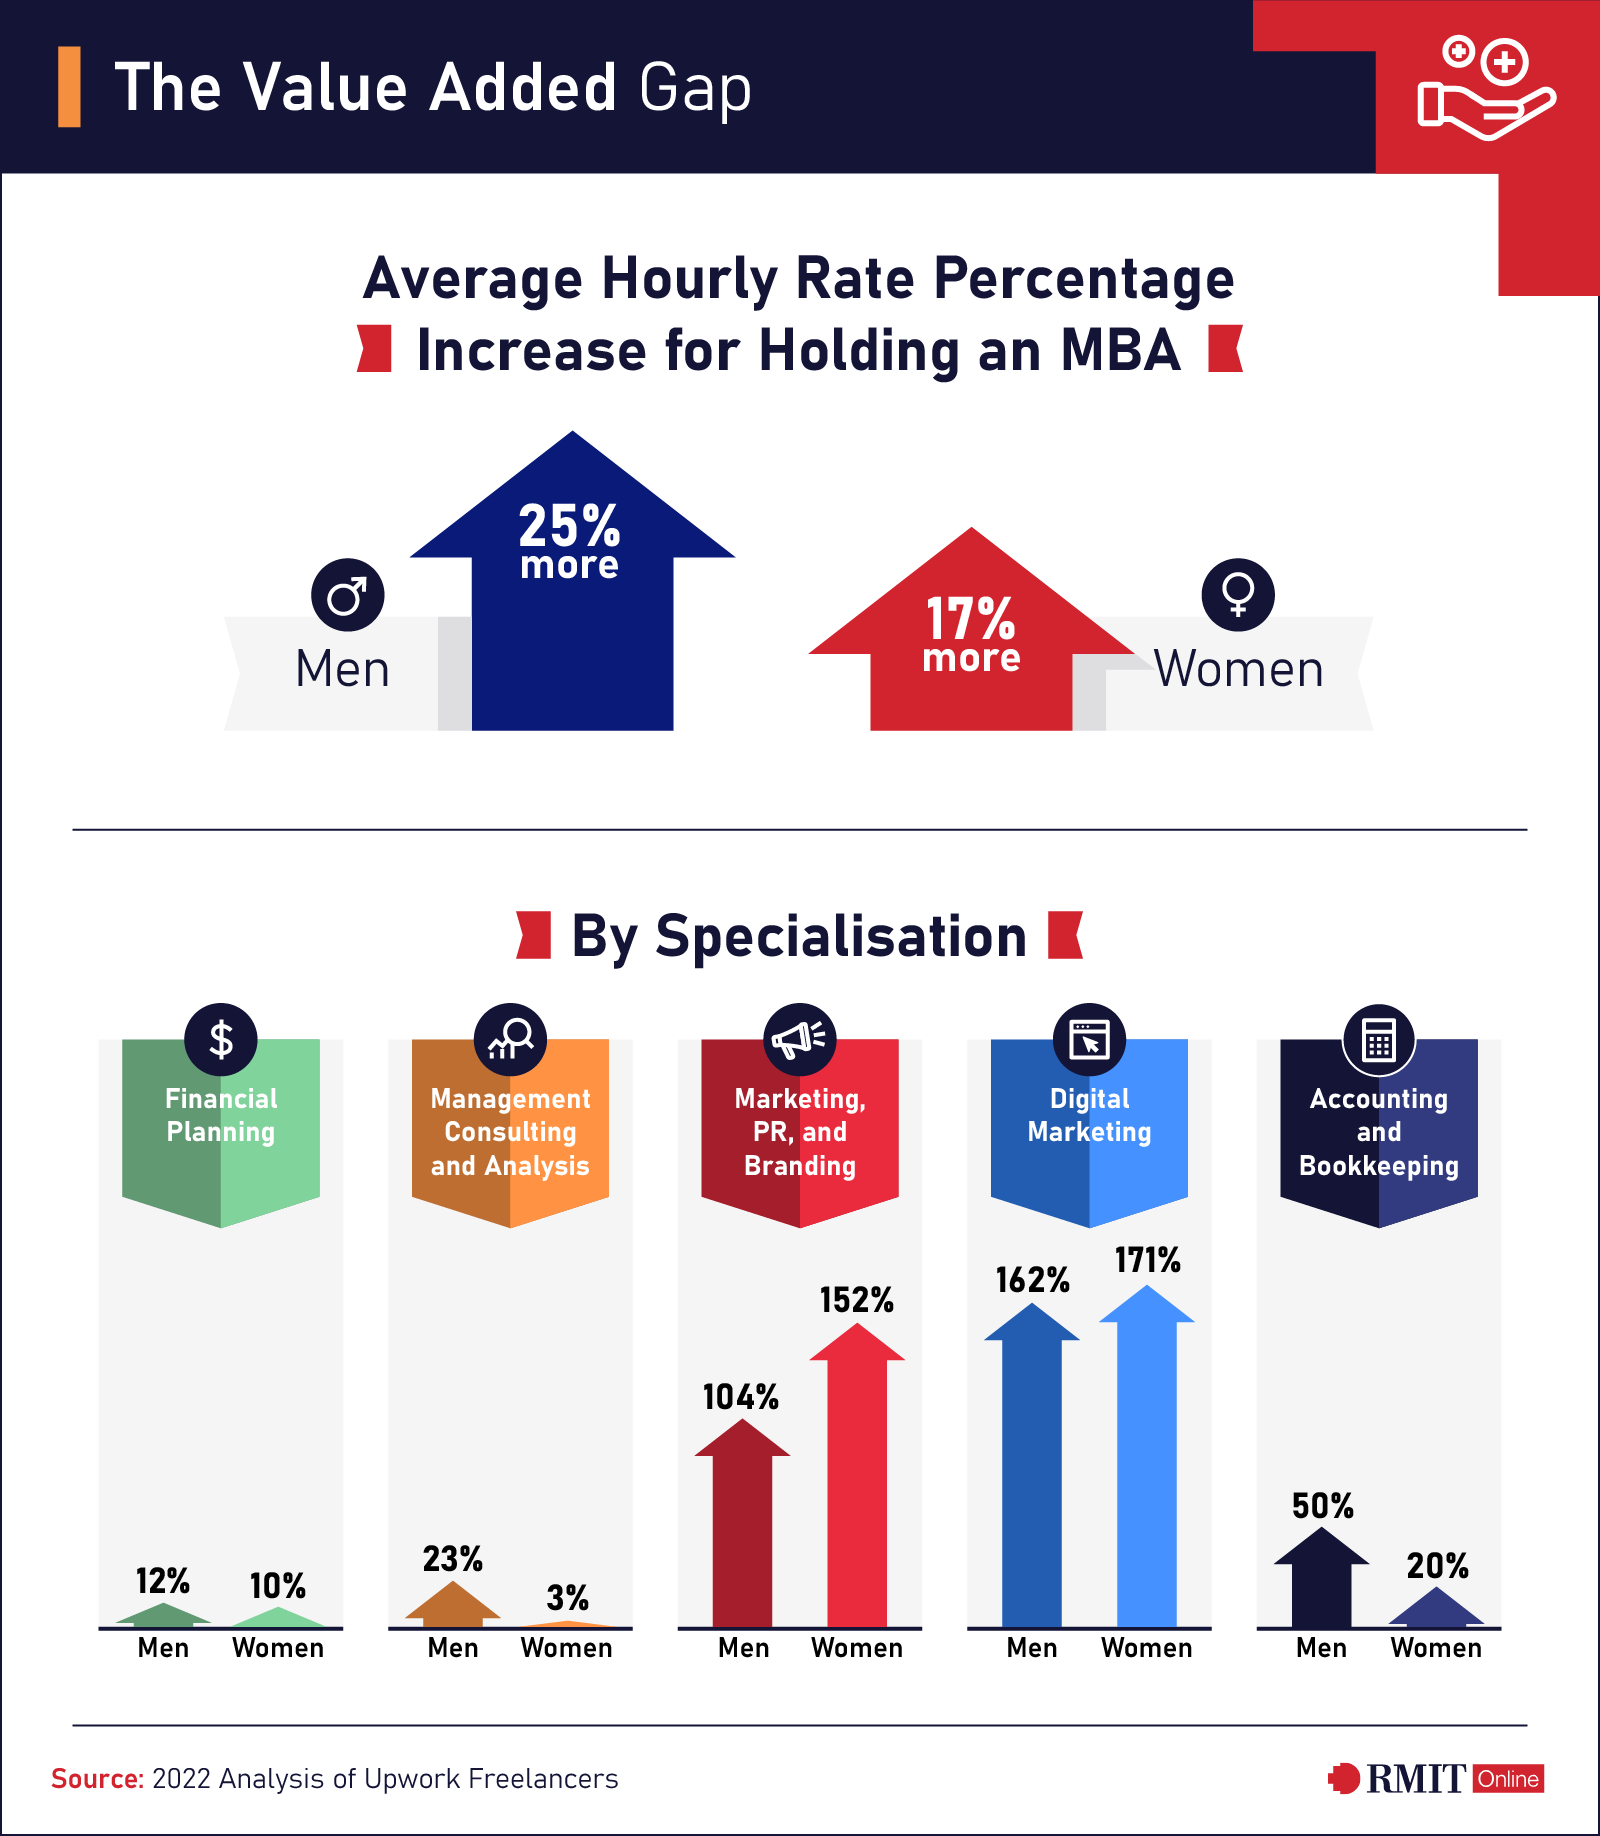 Infographic: The value added gap: the average hourly rate percentage between men and women who hold an MBA and by specialisation: financial planning, management consulting and analysis, marketing, PR and branding, digital marketing and accounting and bookkeeping